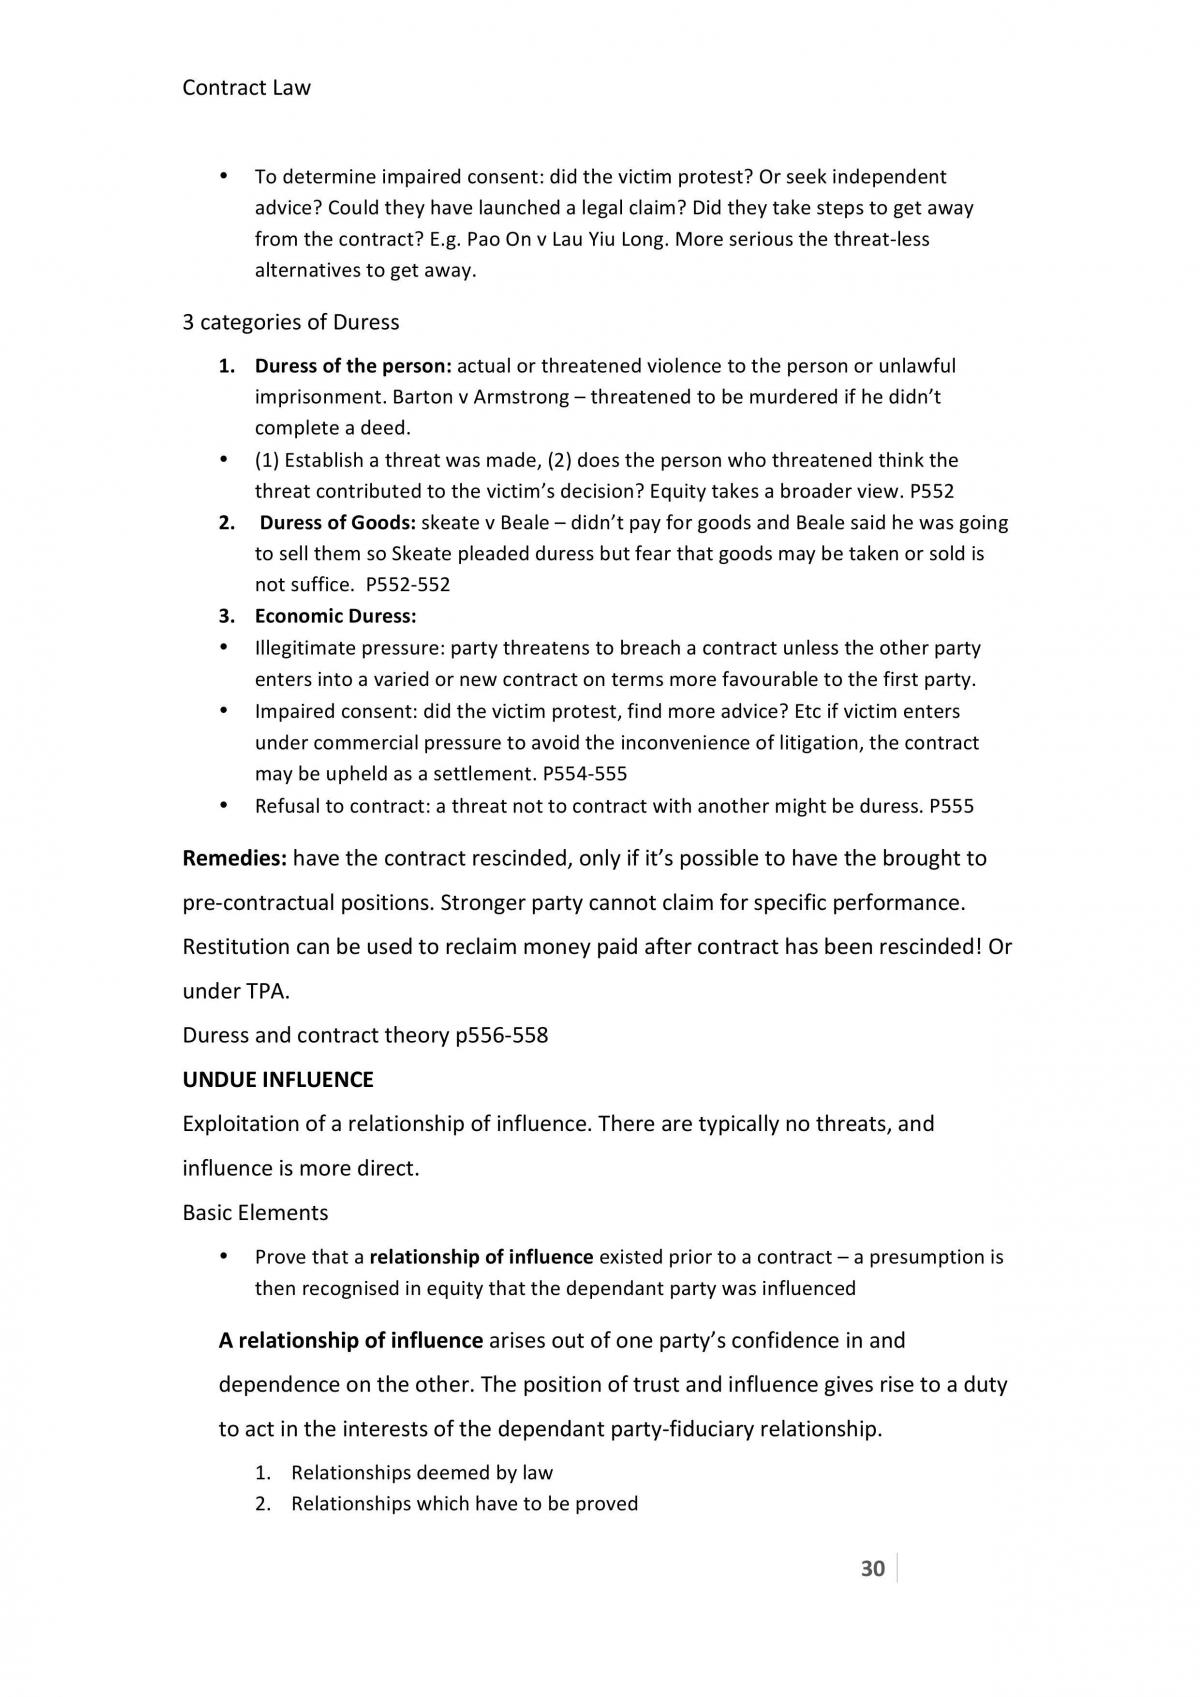 Contract Law full notes - Page 30